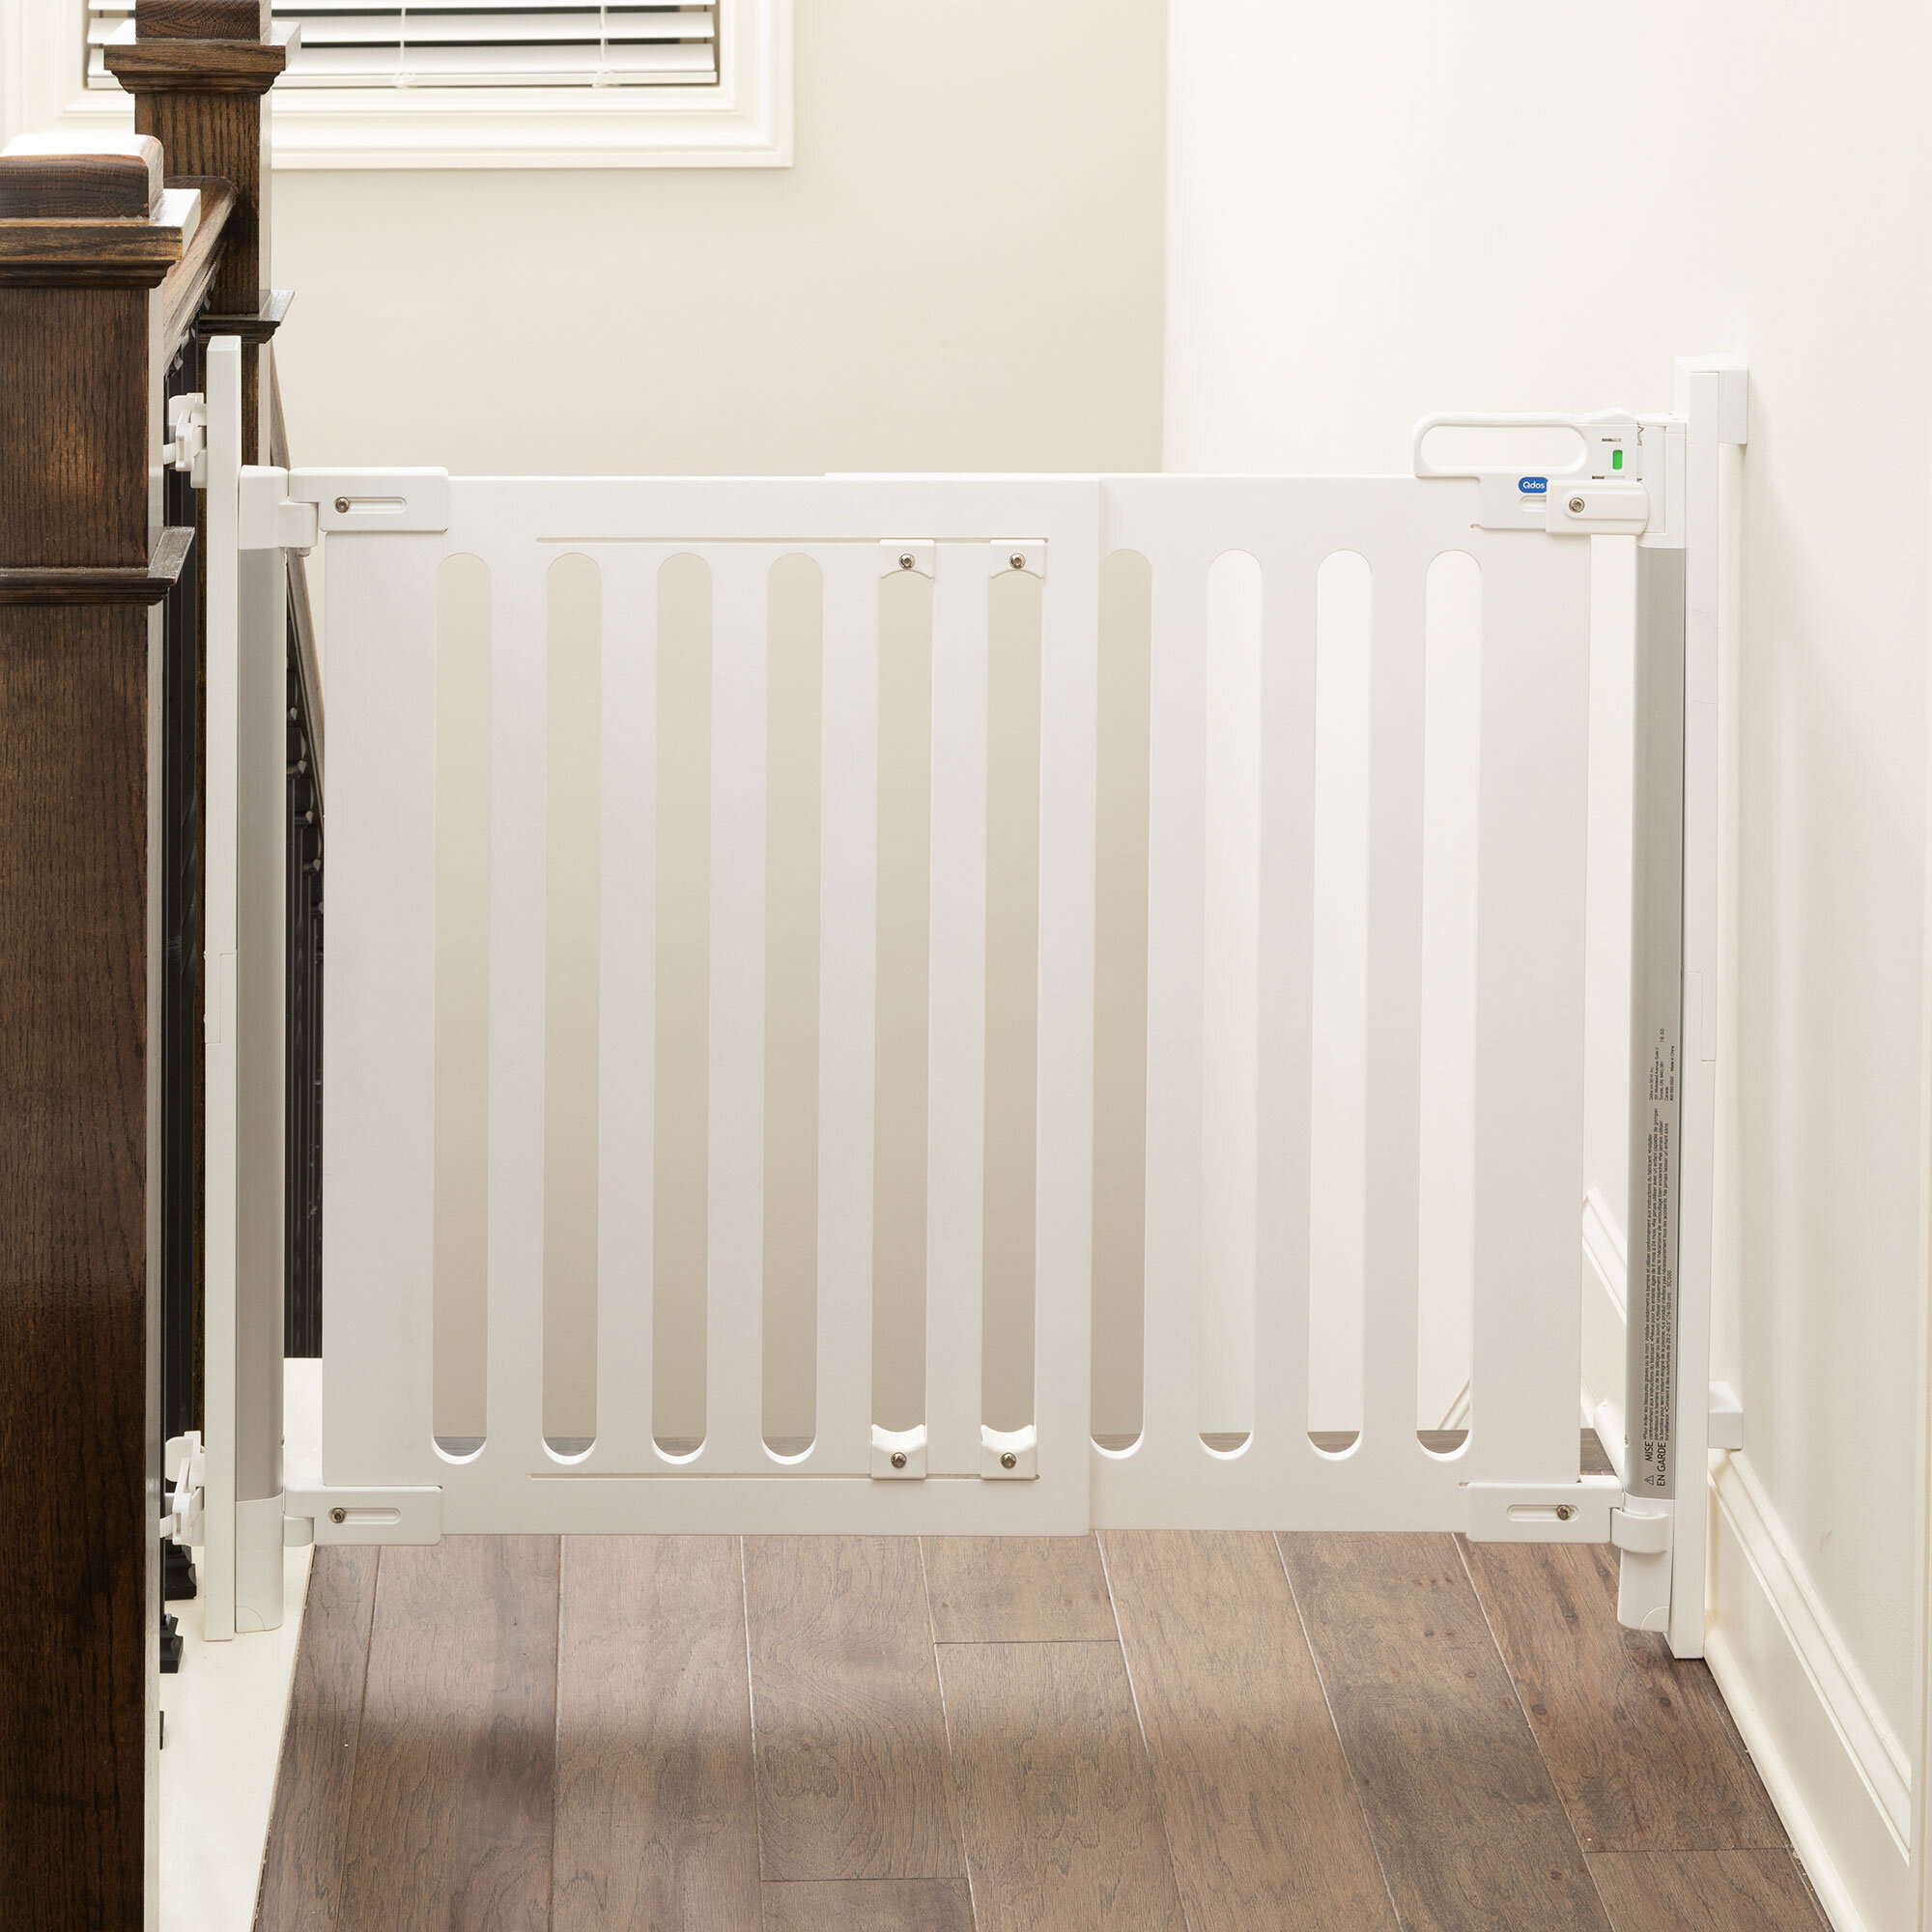 Spectrum Designer Baby Gate at top of stairs